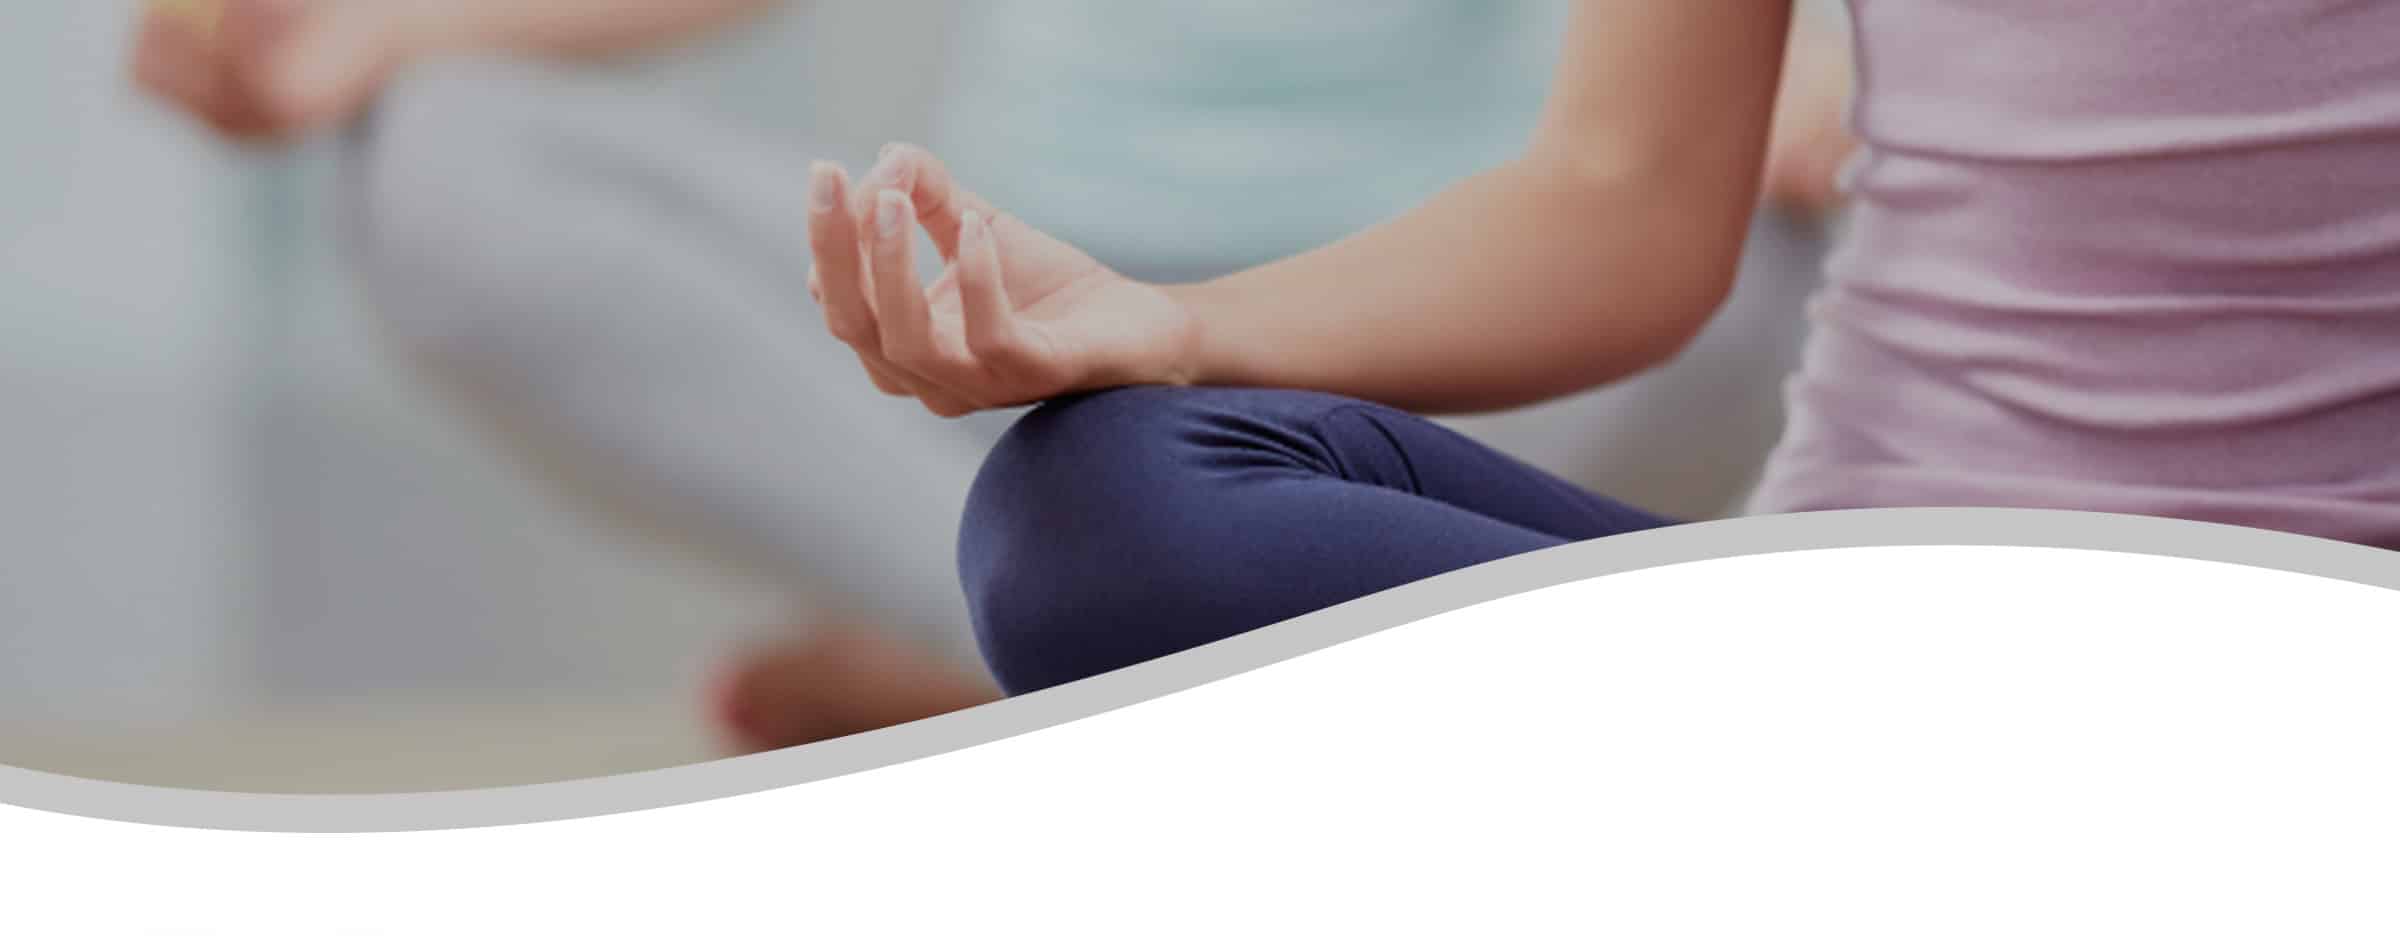 Yogis, deepen the connection of <br><strong>mind and body</strong>